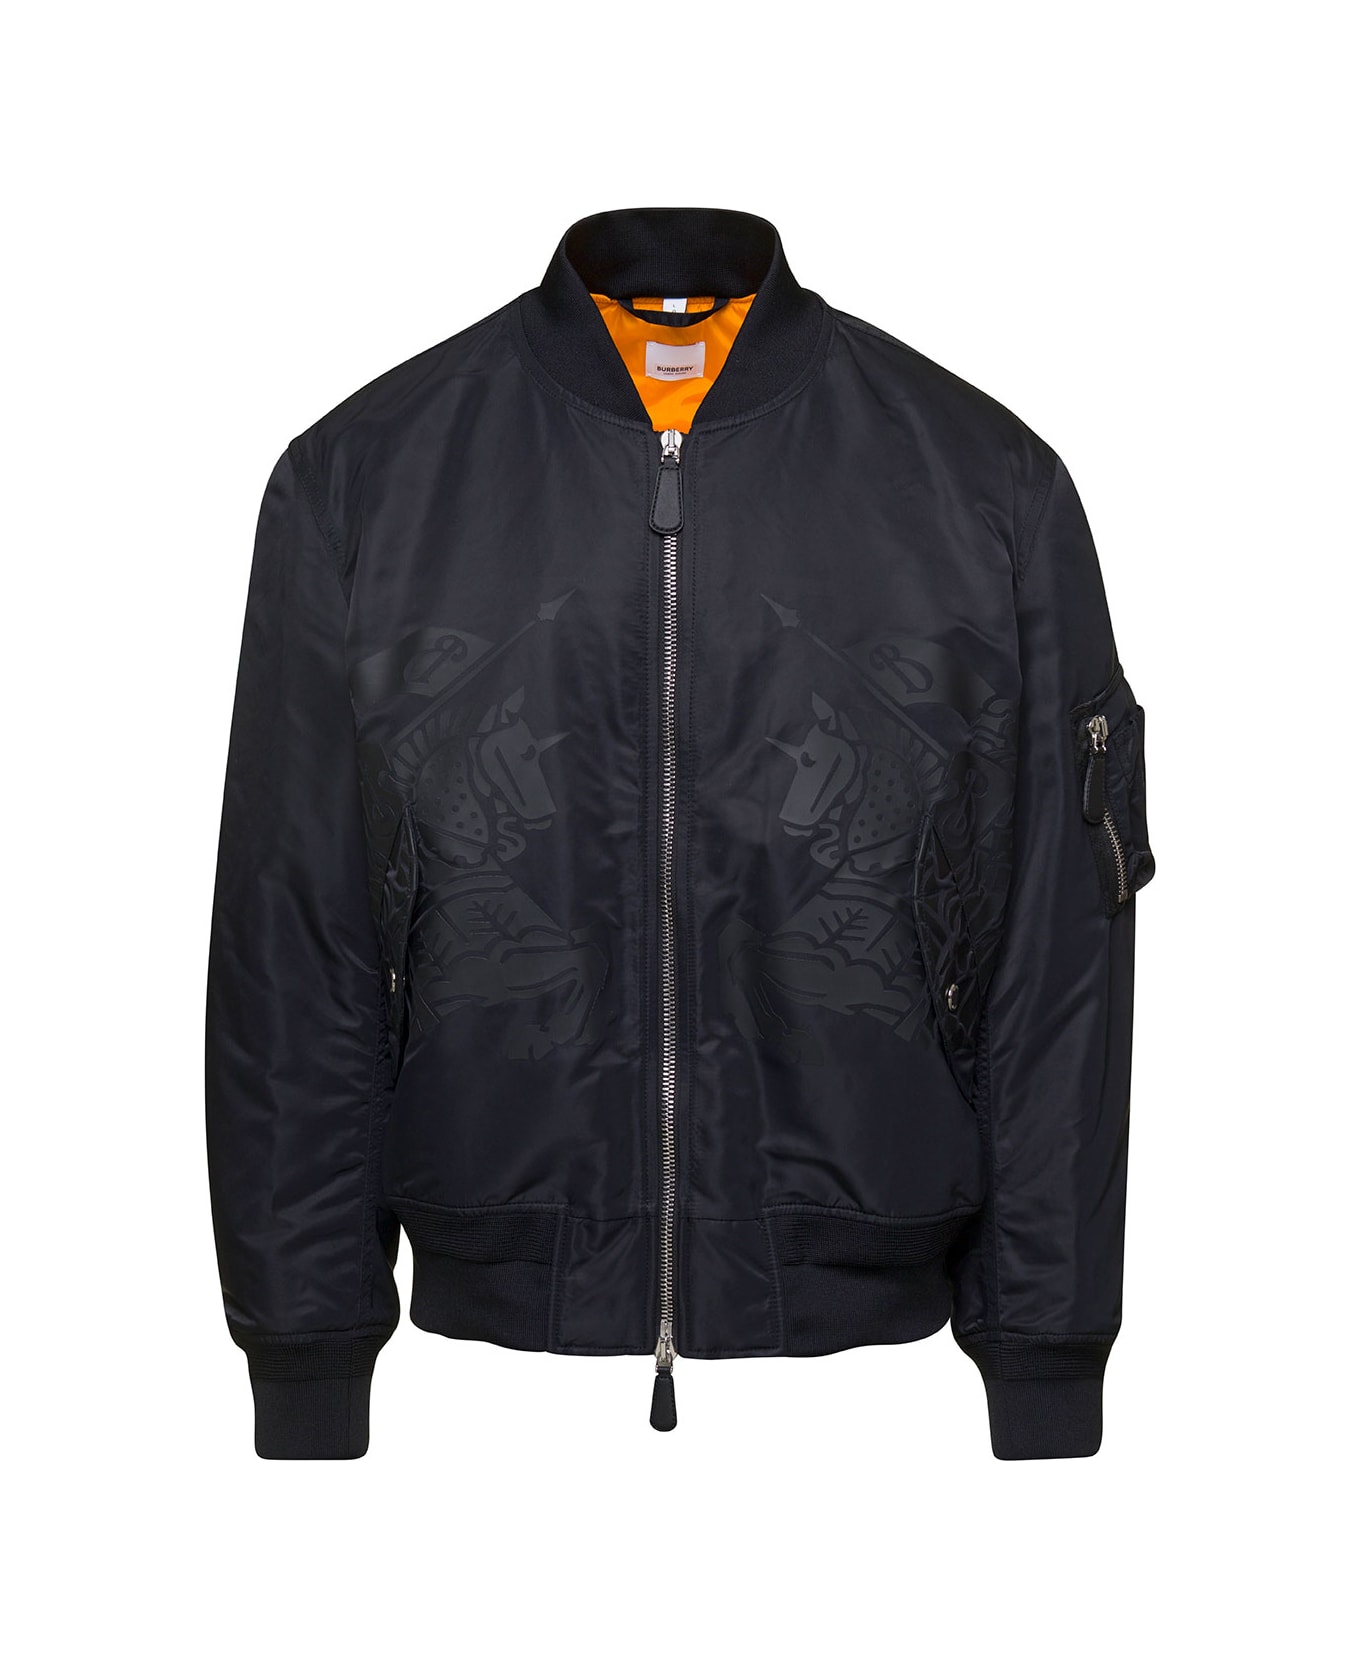 Burberry Black Bomber Jacket With Equestrian Knight Print In Polyamide Stretch Man - Black ジャケット